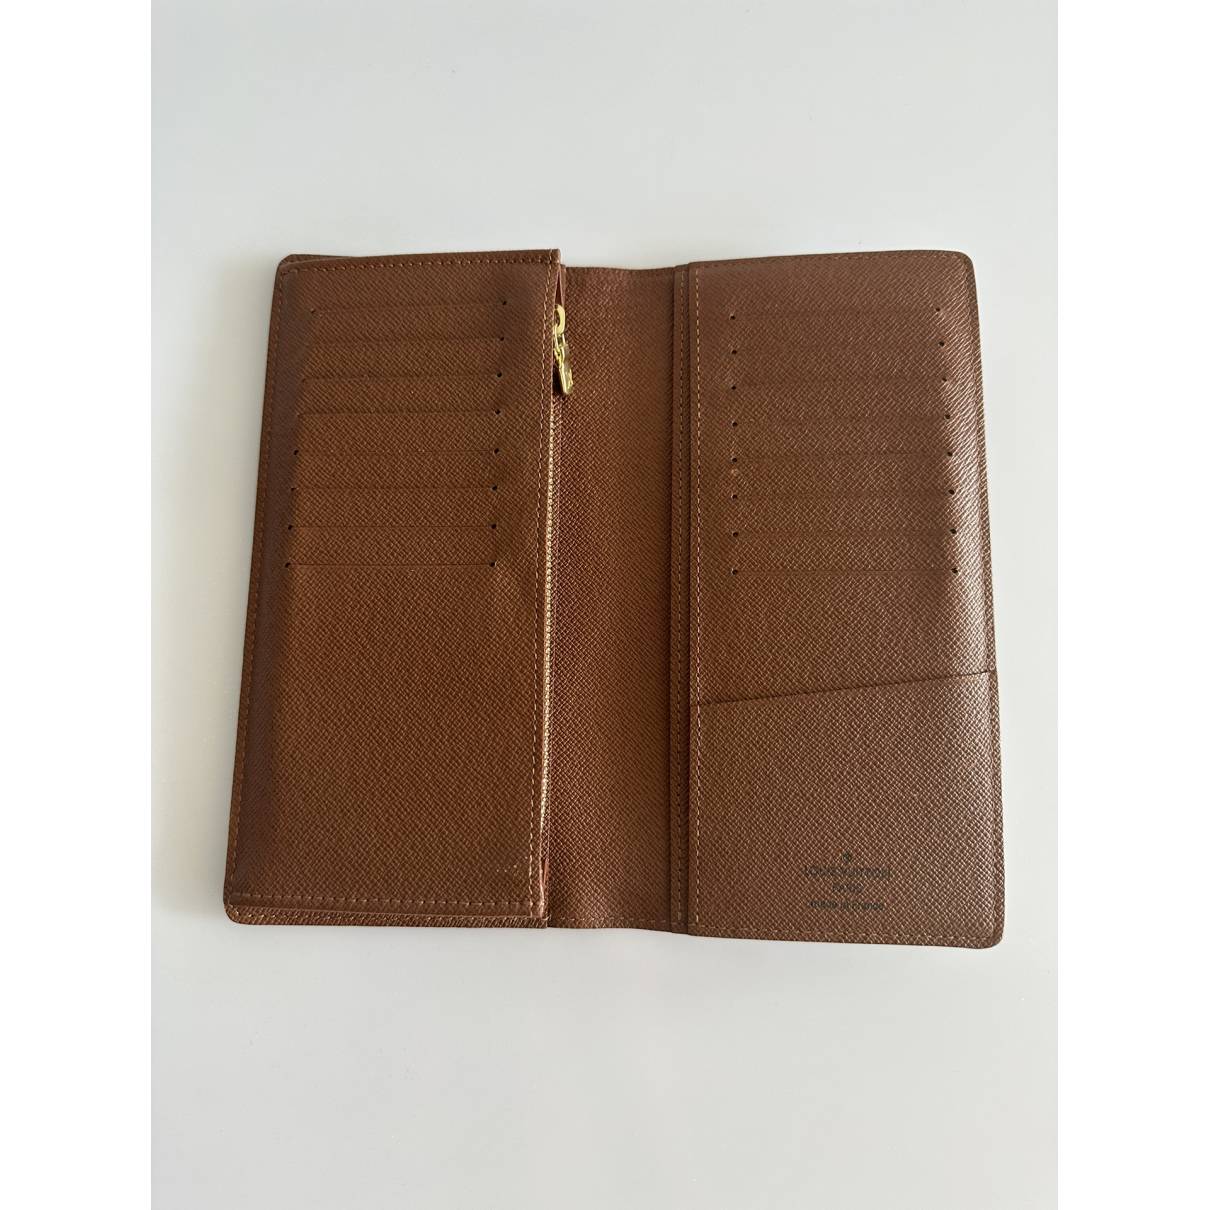 Brazza Wallet - Luxury Long Wallets - Wallets and Small Leather